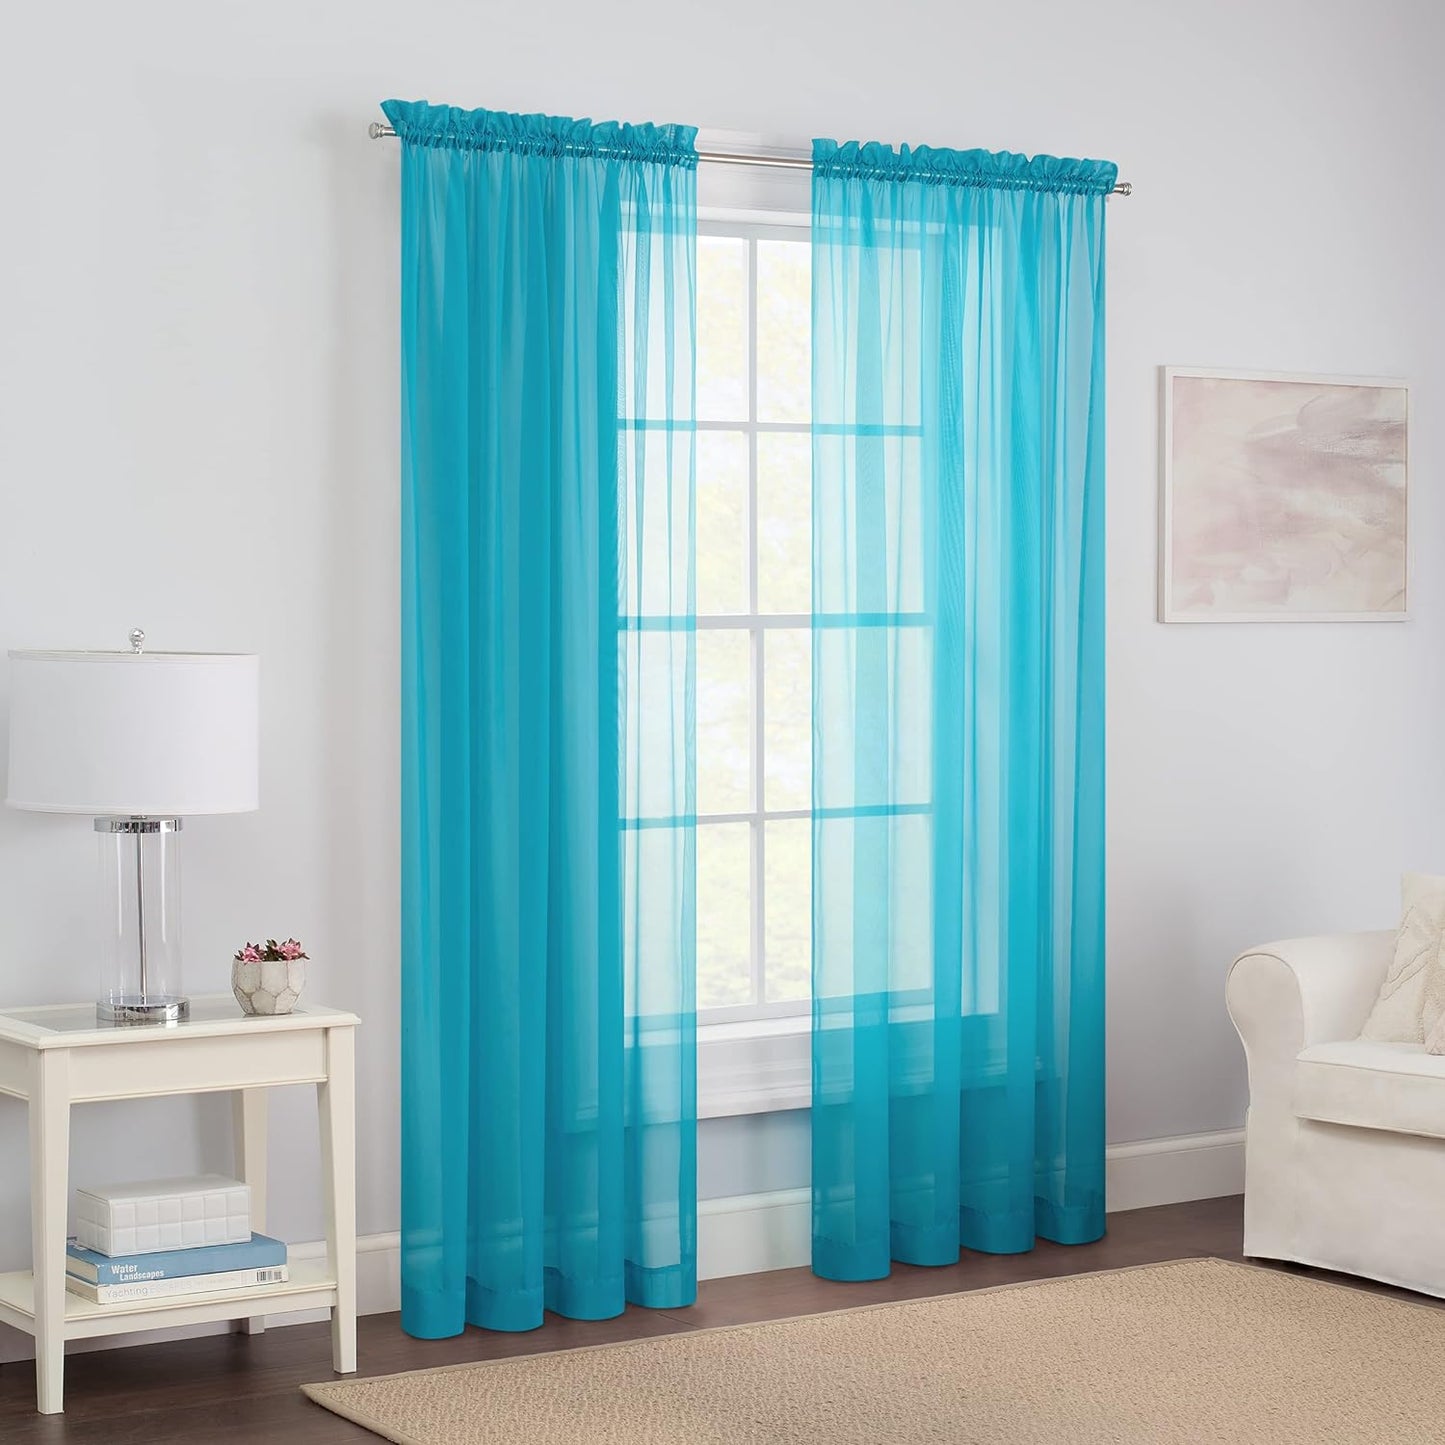 Pairs to Go Victoria Voile Modern Sheer Rod Pocket Window Curtains for Living Room (2 Panels), 59 in X 84 In, Taupe  Ellery Homestyles Turquoise Curtains 59 In X 84 In